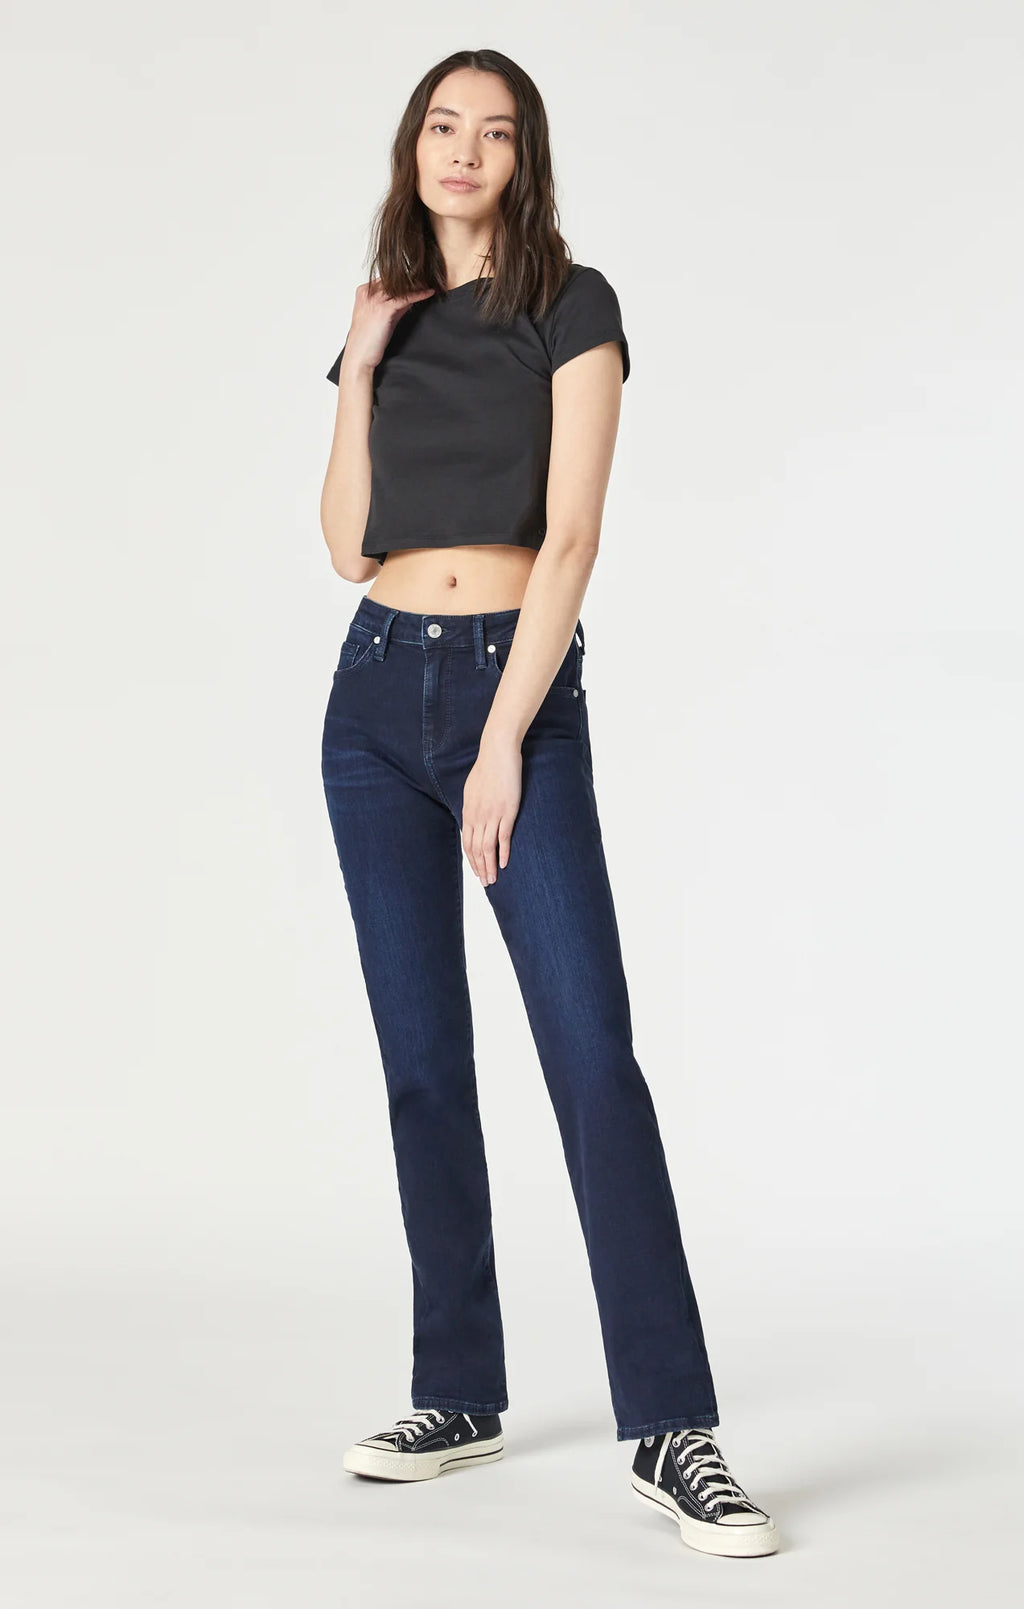 Rapcopter Khaki Flare Jeans Solid Basic Casual High Waisted Denim